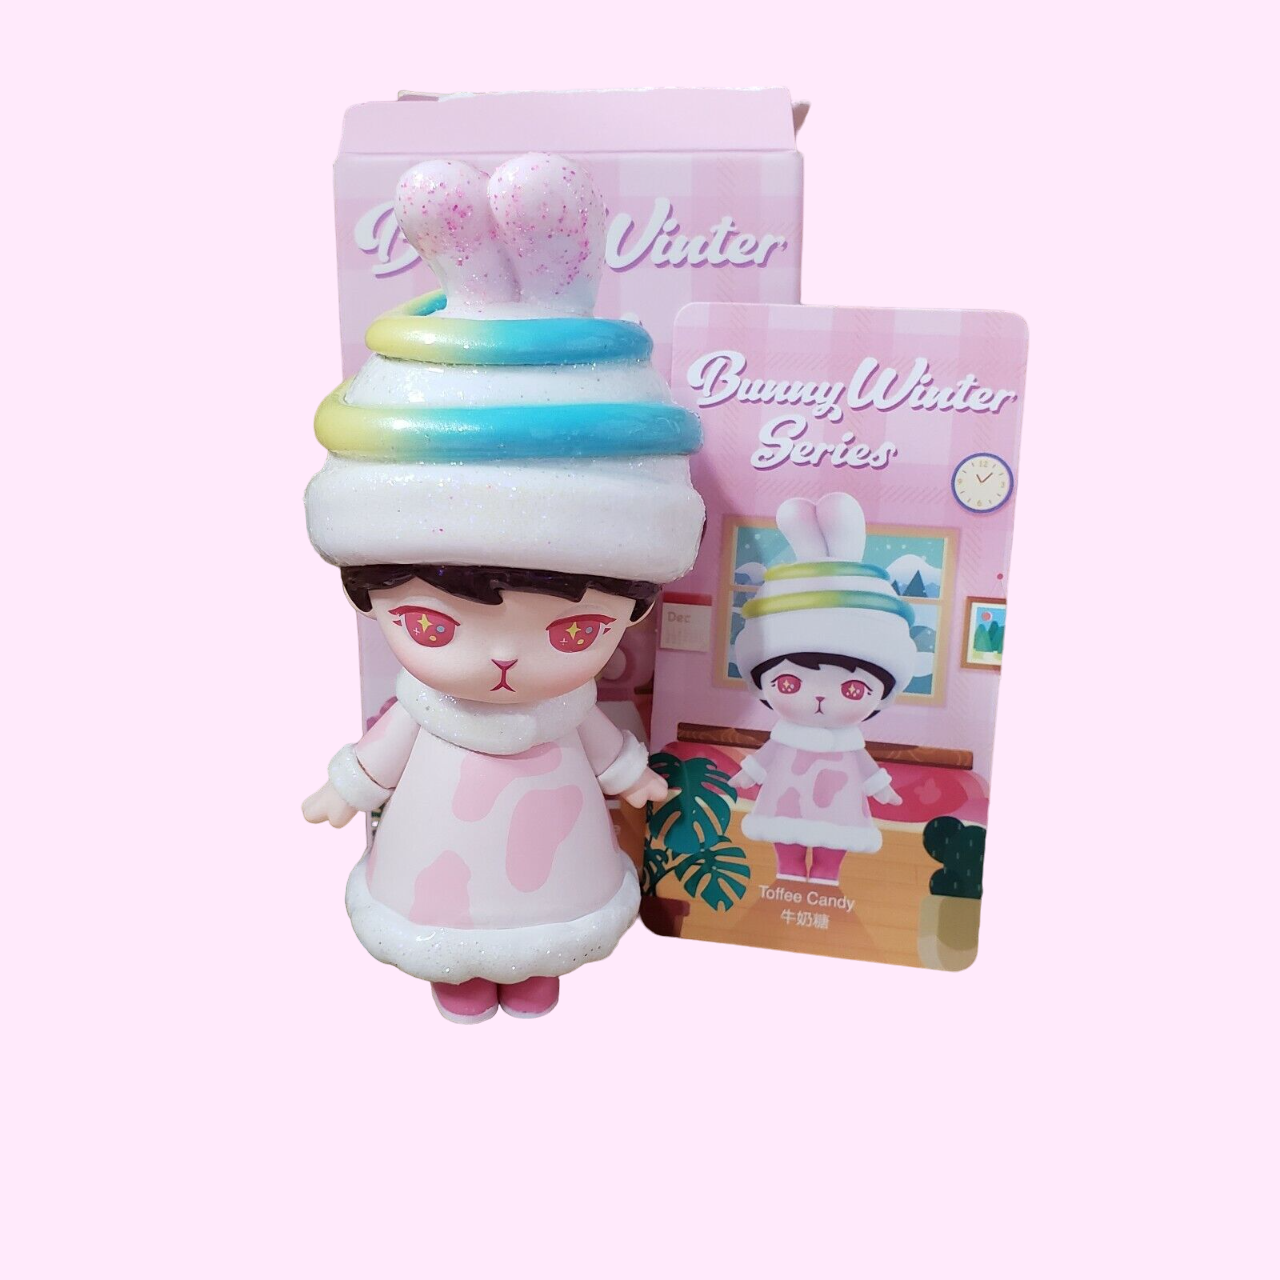 Pop Mart Bunny Winter Series, Toffee Candy, Modified Figure